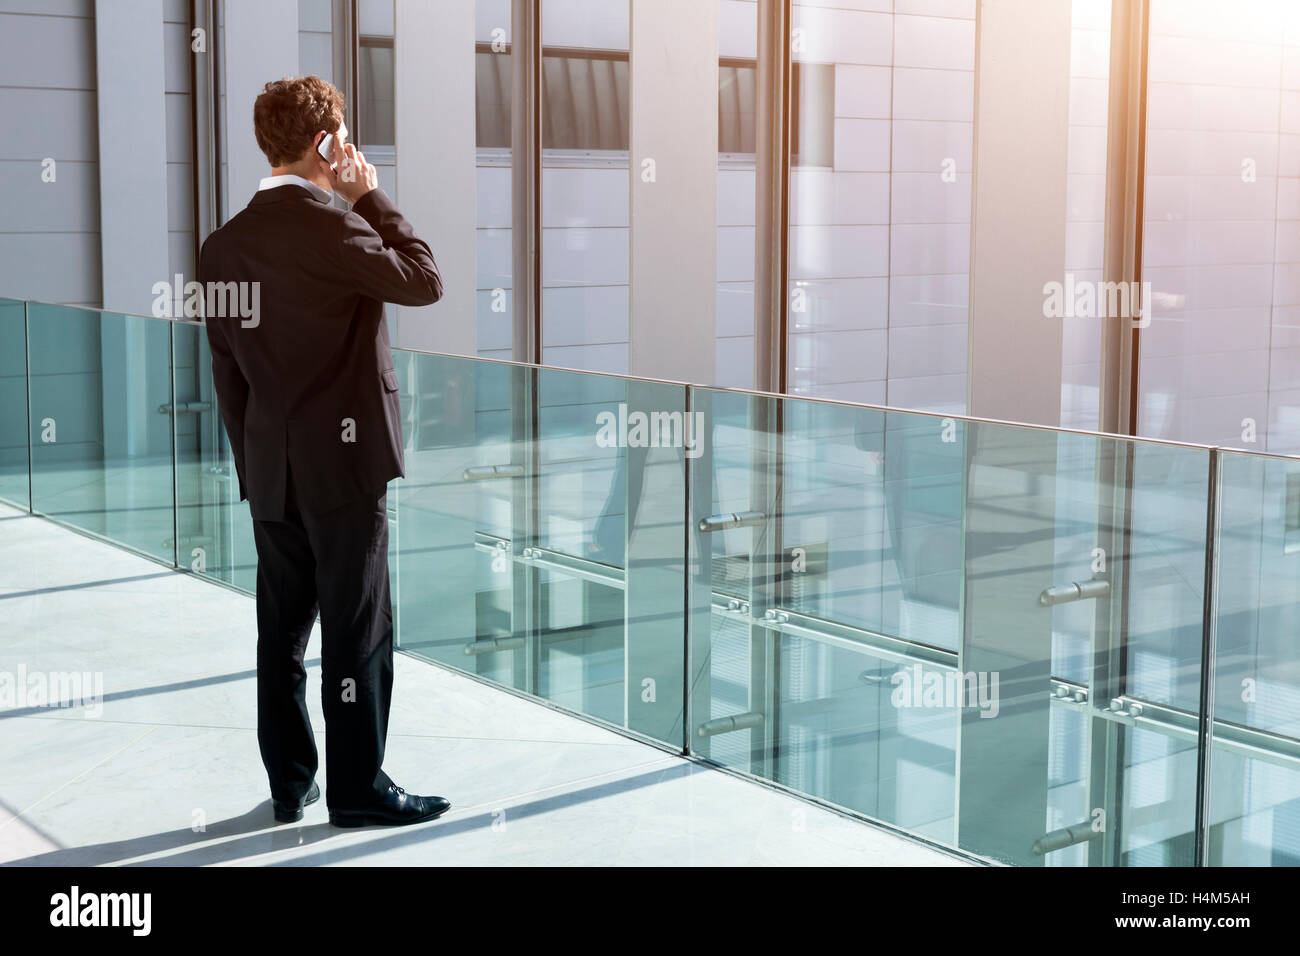 Businessman taking a call on smartphone in office building Stock Photo